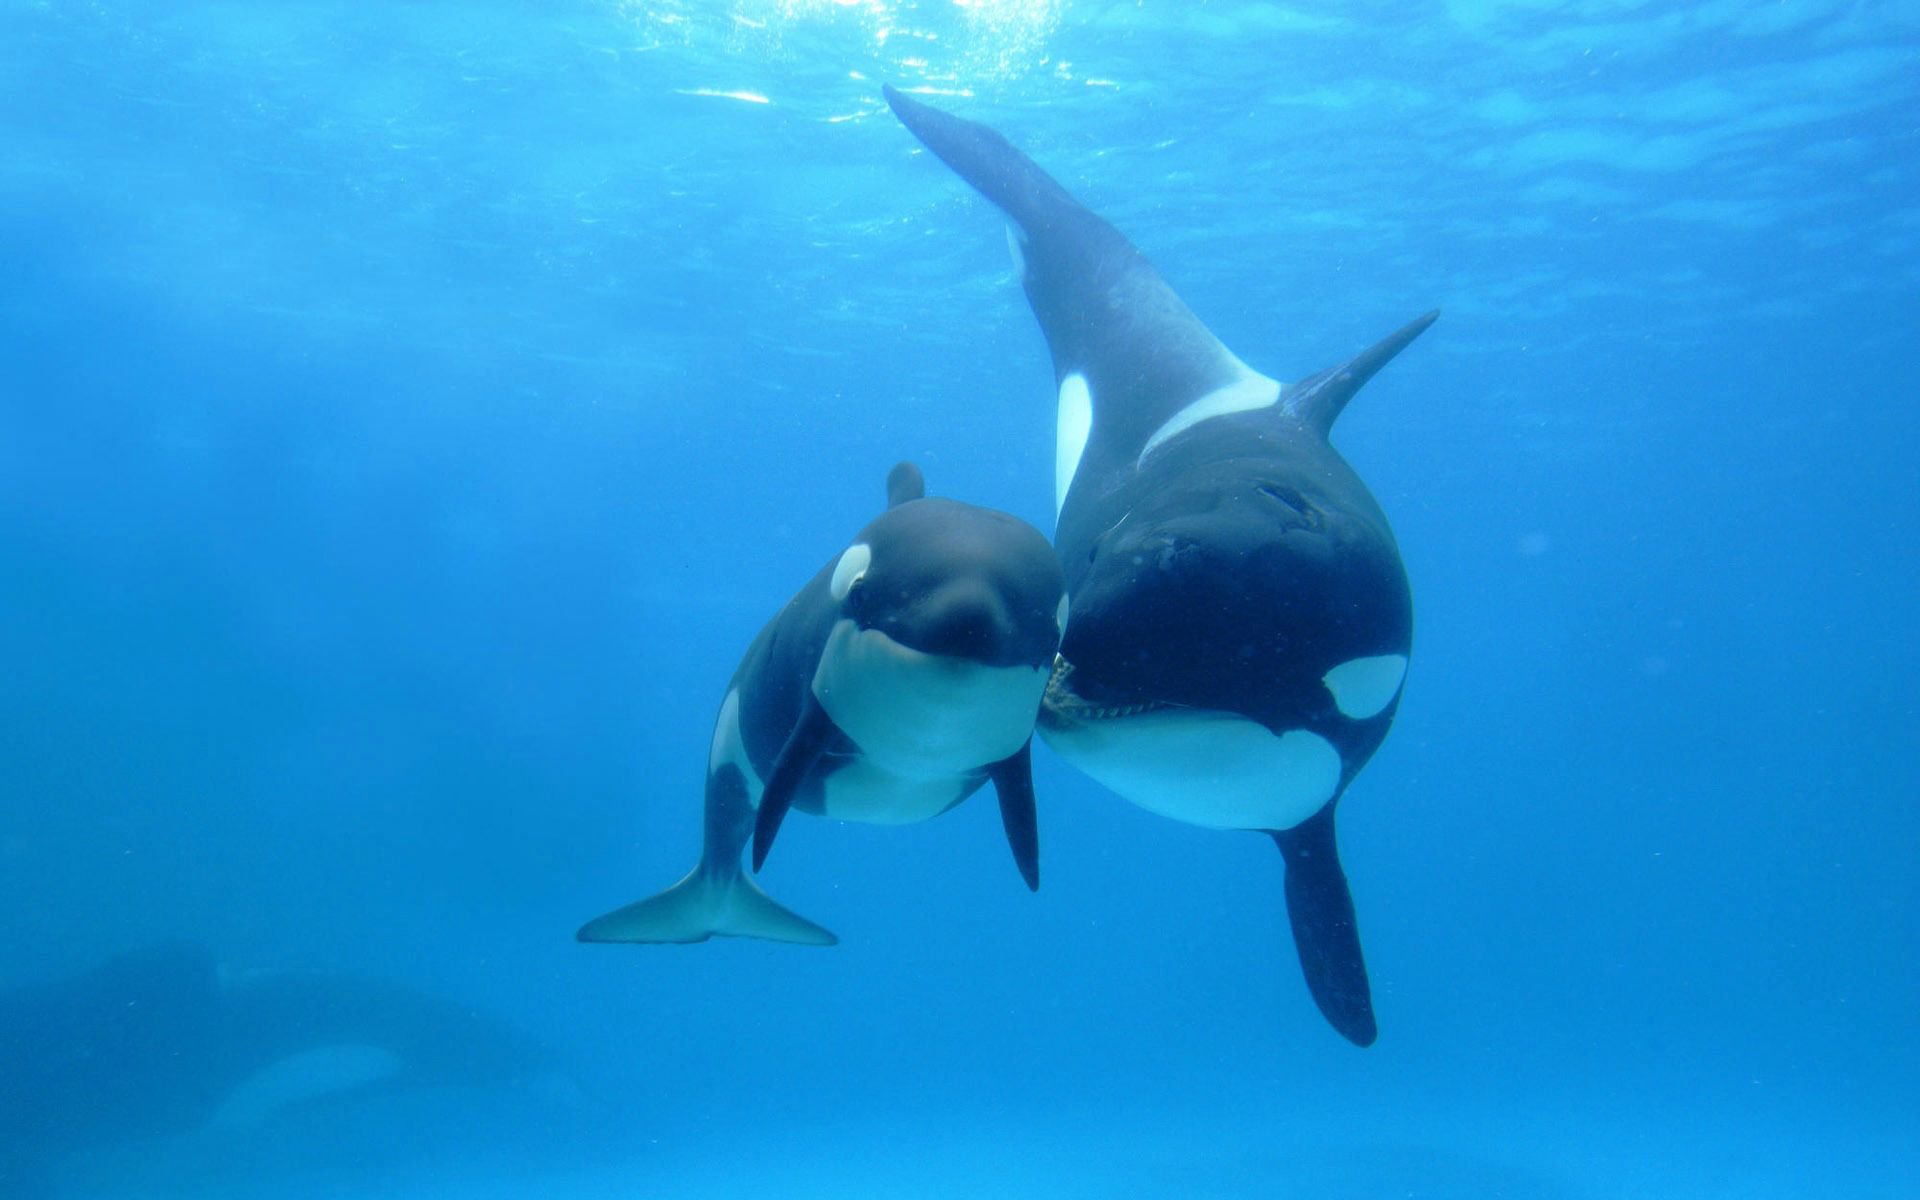 Killer Whale with a Cub